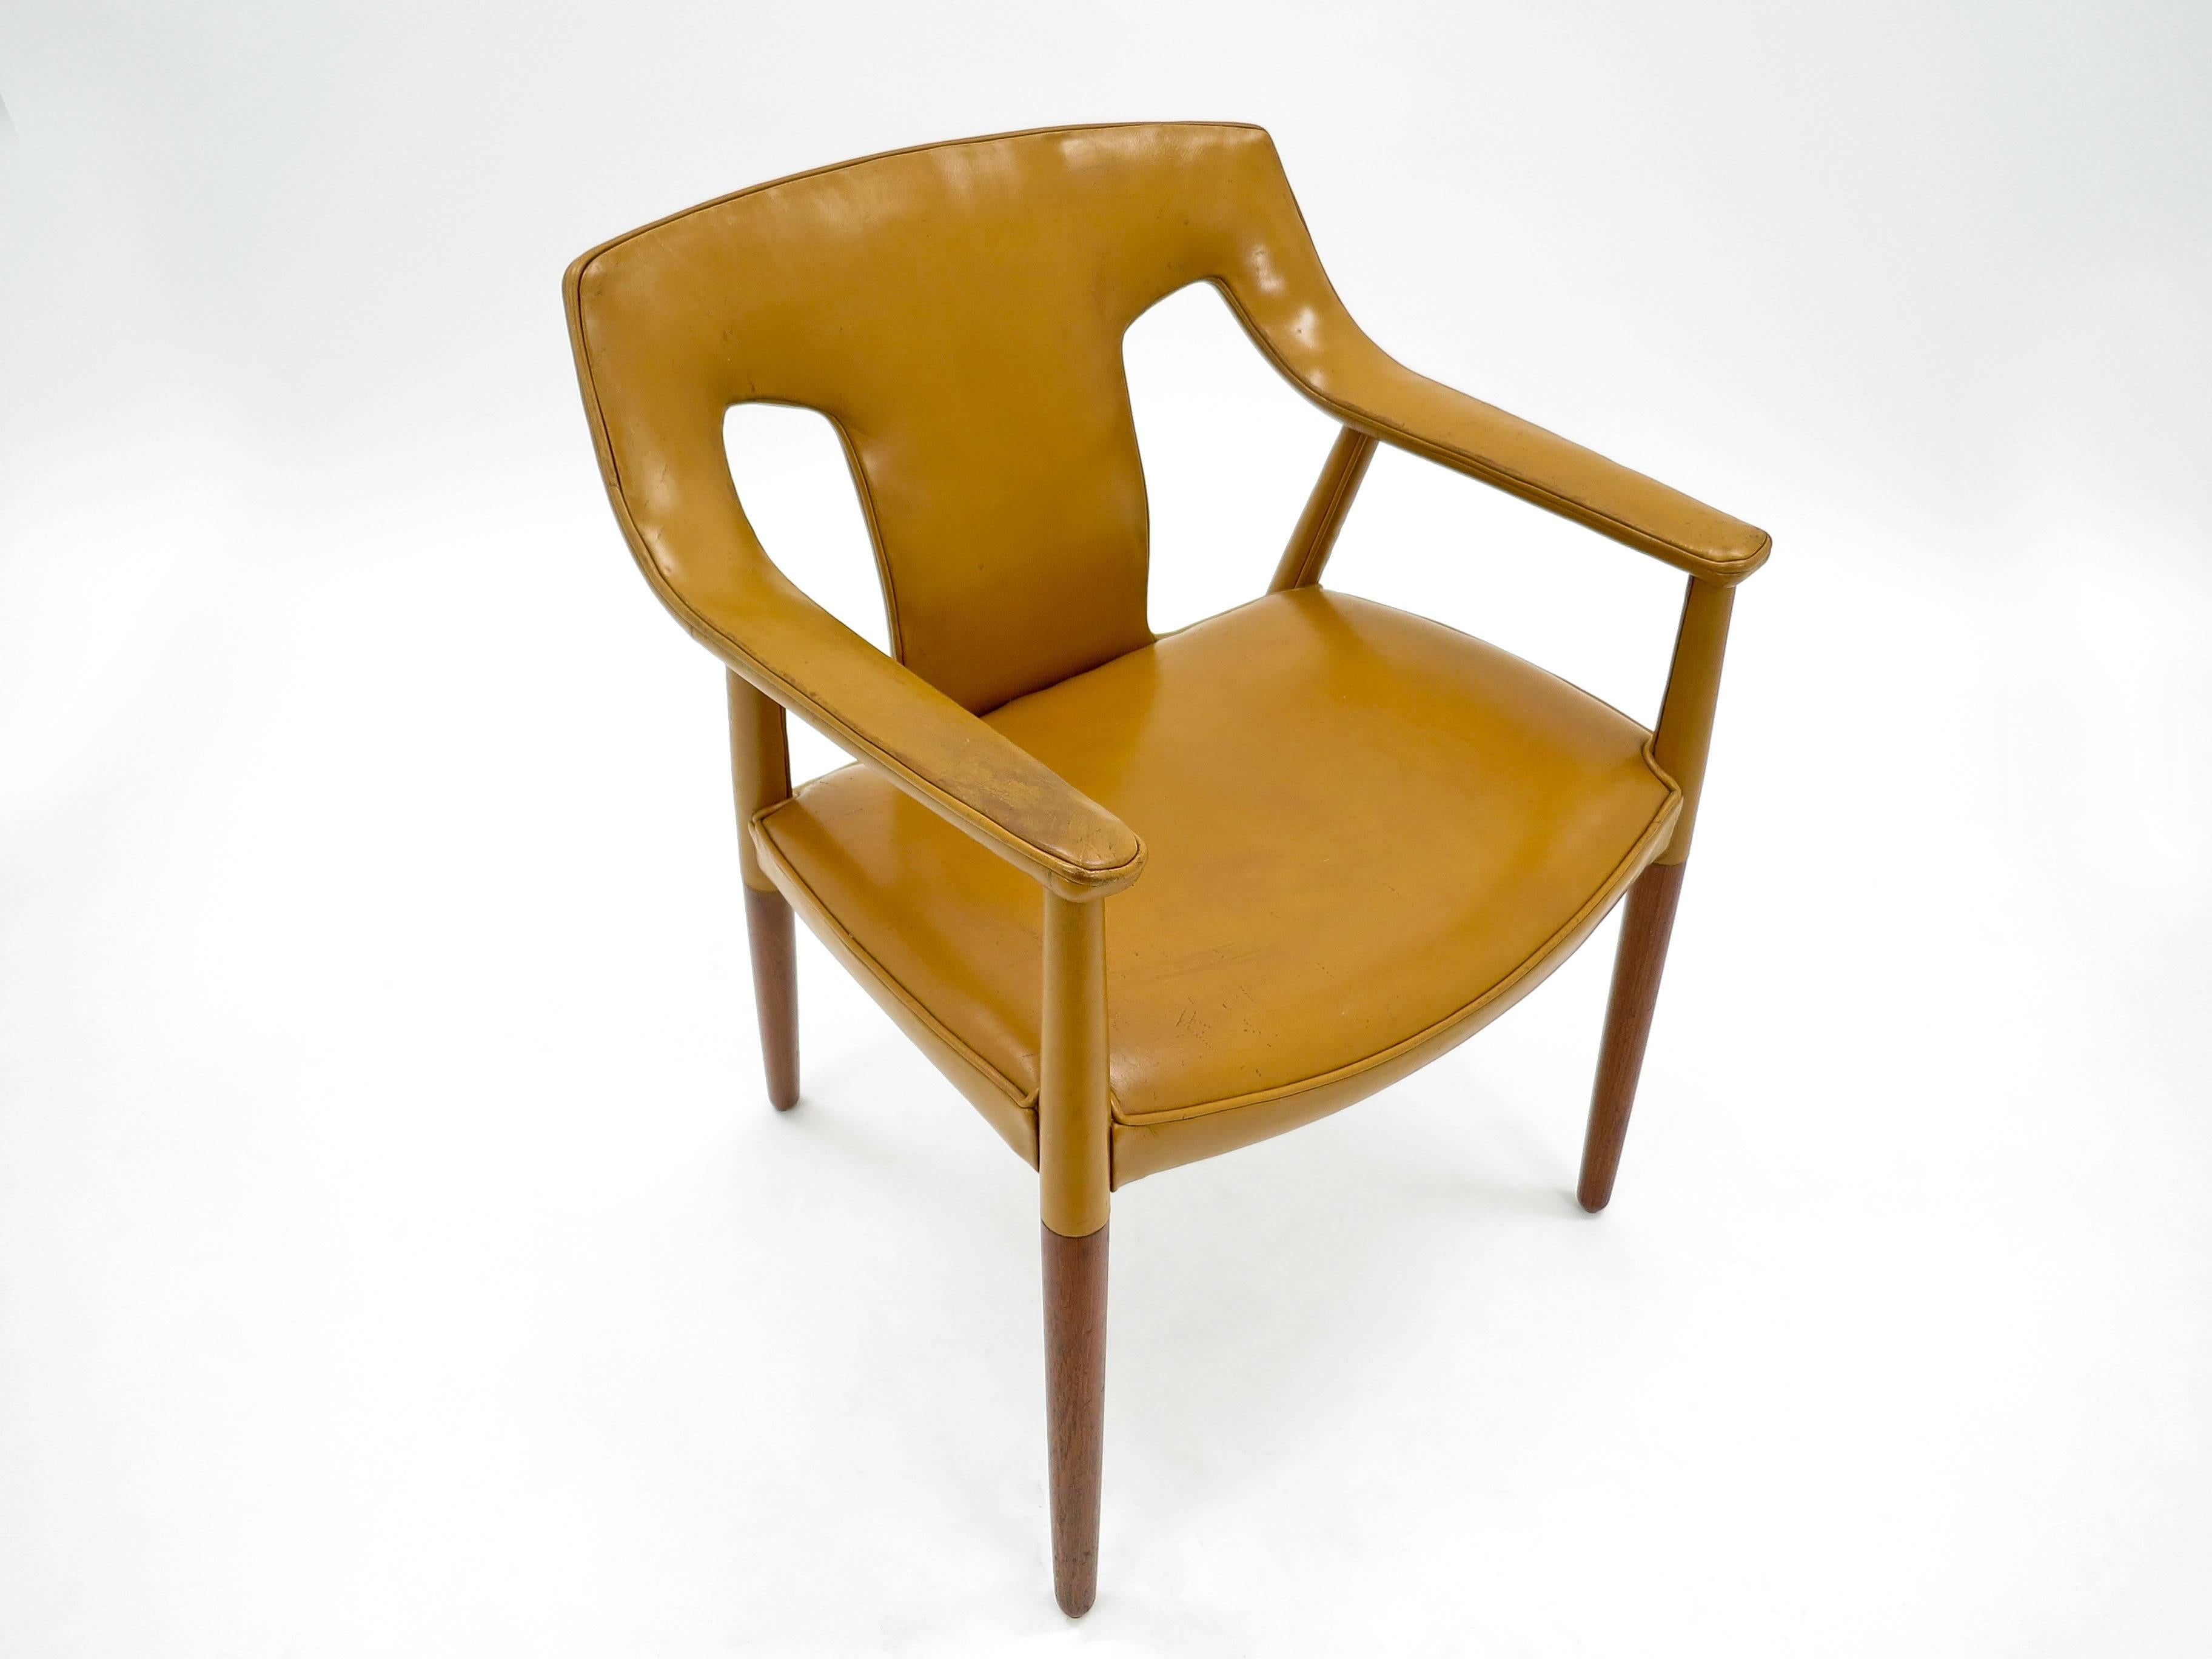 Bender Madsen and Larsen Armchair Leather and Teak, Danish, 1950s For Sale 2